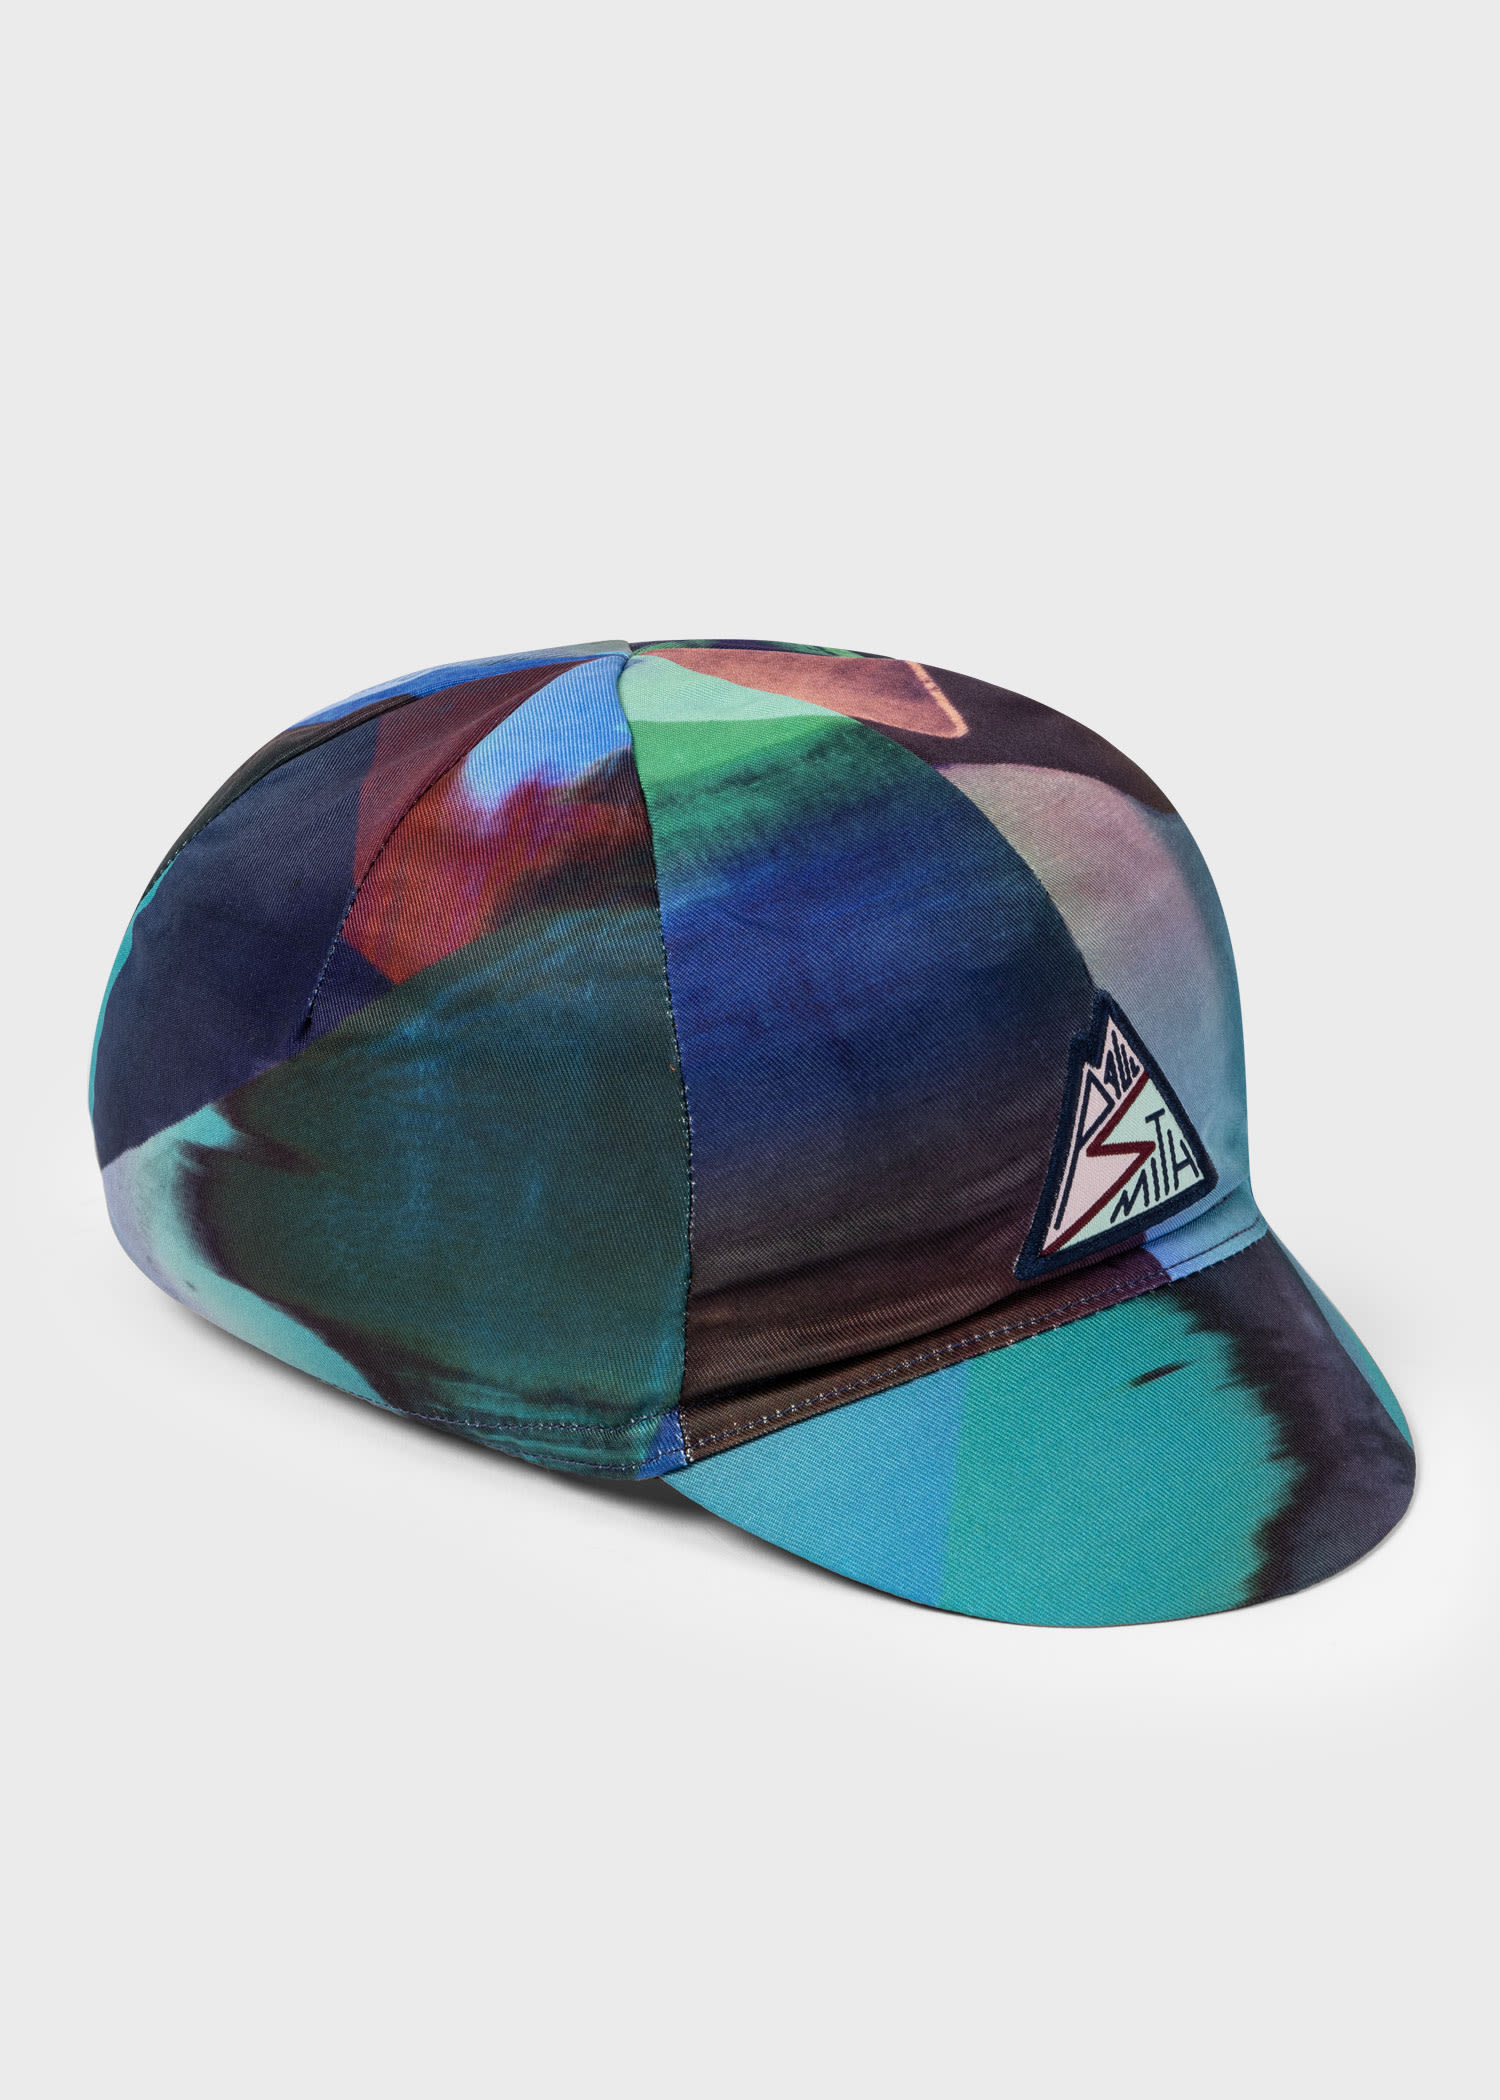 Paul Smith 'abstract Landscape' Cycling Cap Blue